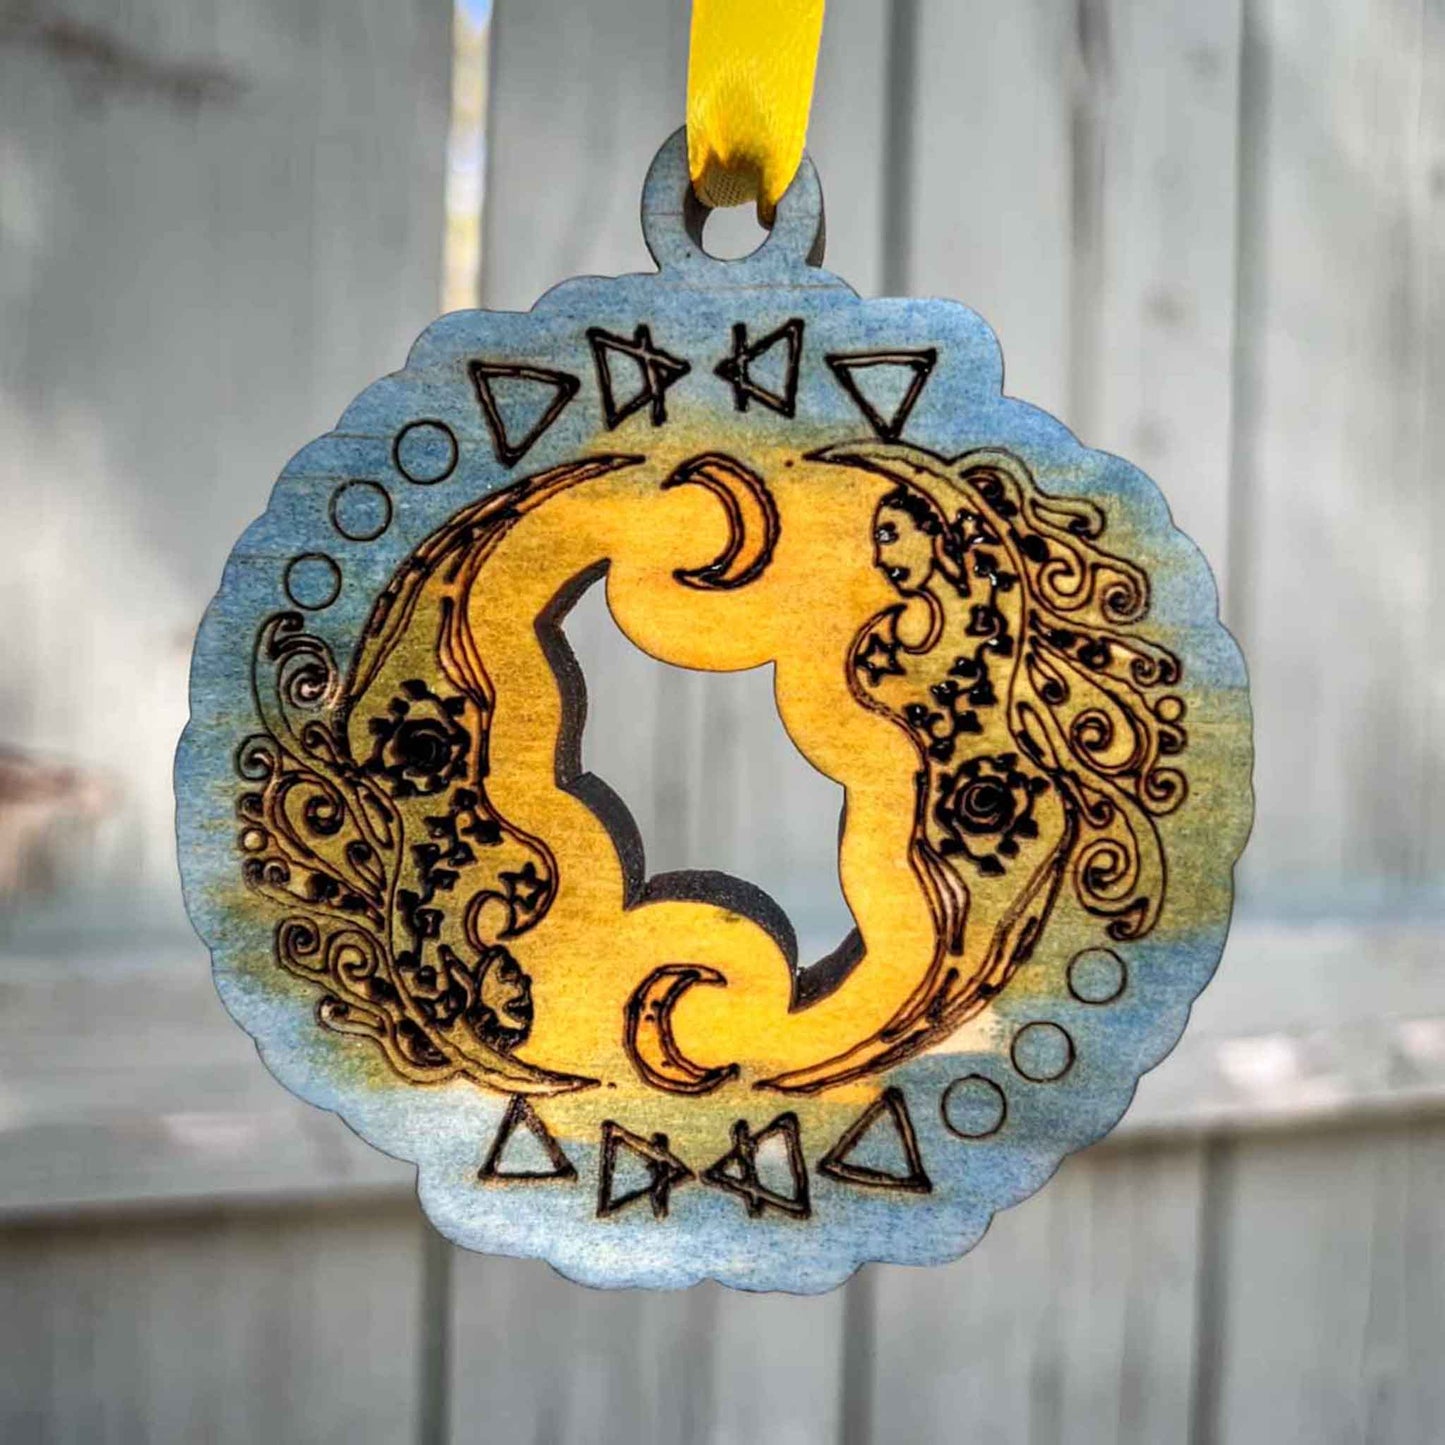 Goddess Moon Elemental Hanging Decor; pagan ornament; witchy home decor accent; hanging decor; earth goddess; witch aesthetic